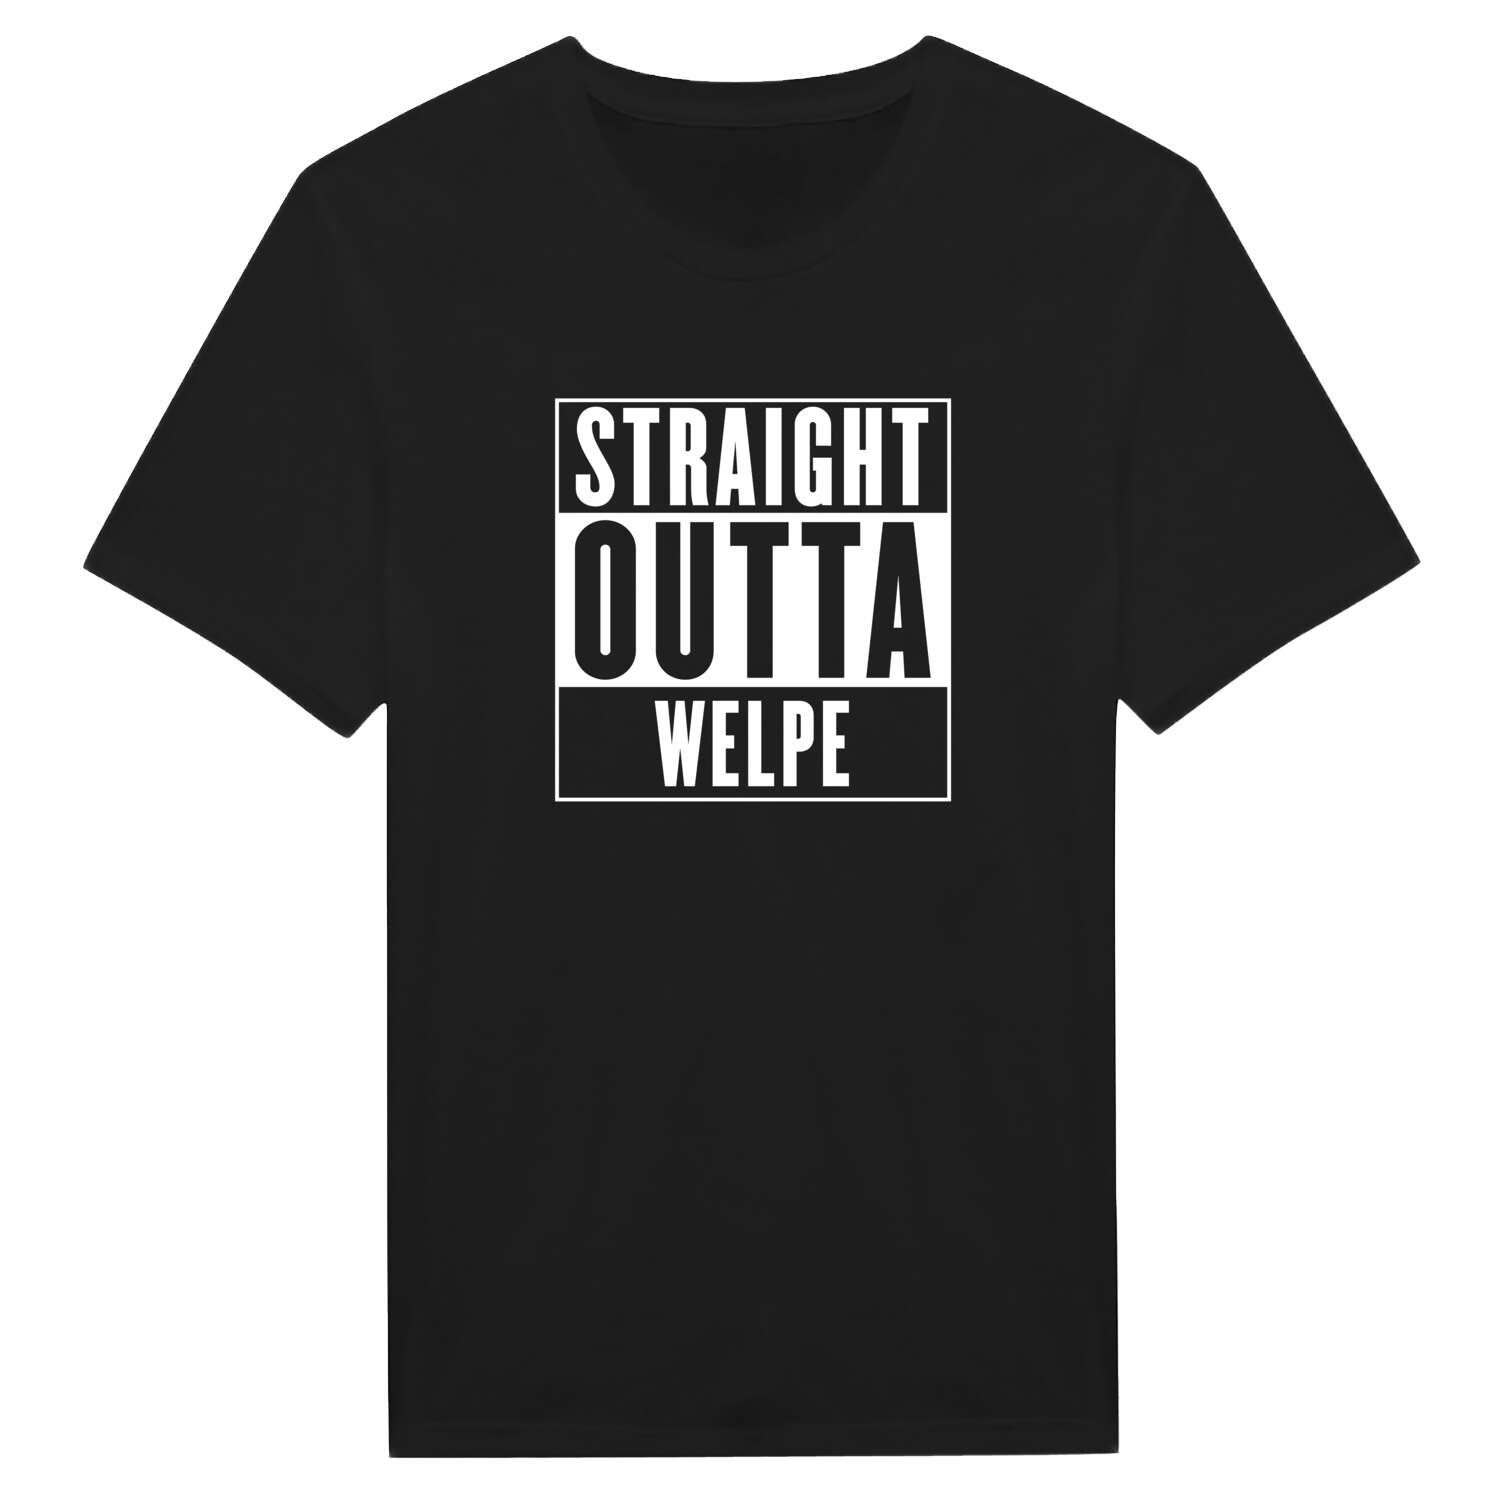 Welpe T-Shirt »Straight Outta«